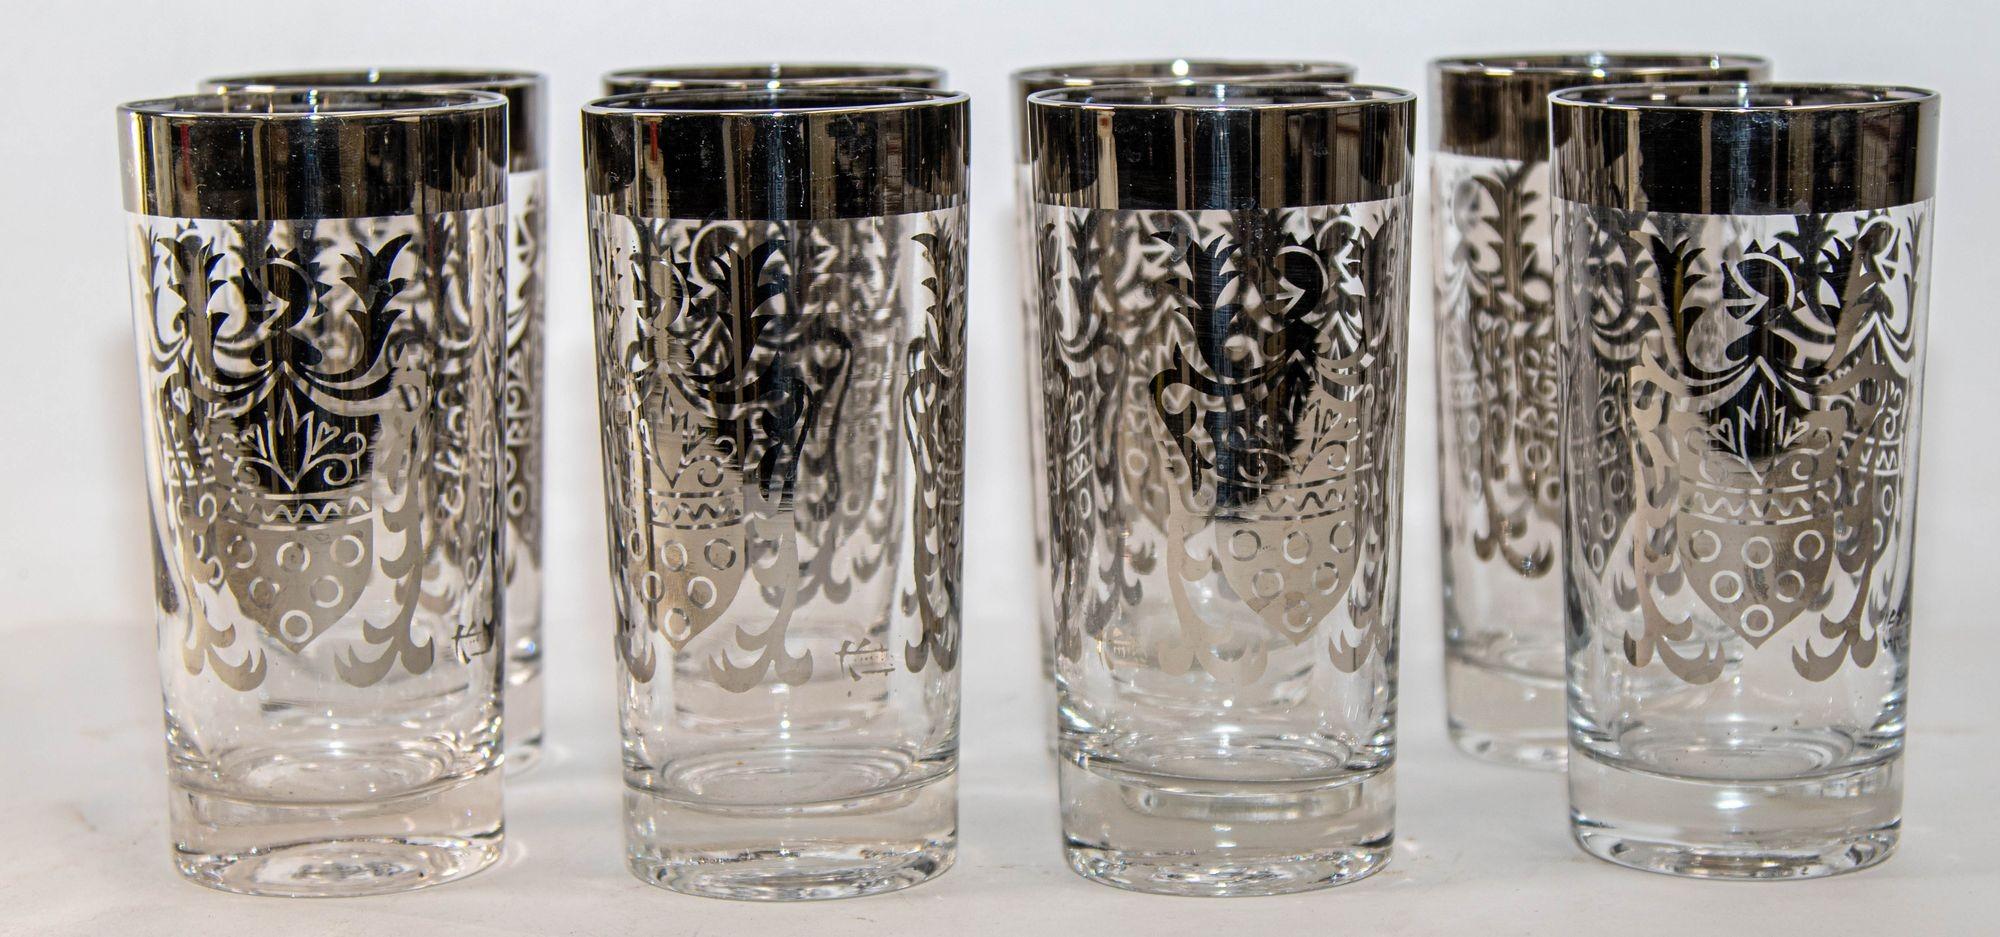 Vintage Kimiko Signed Silver High Ball Glasses Set of 8 with Carrying Caddy 60's For Sale 12